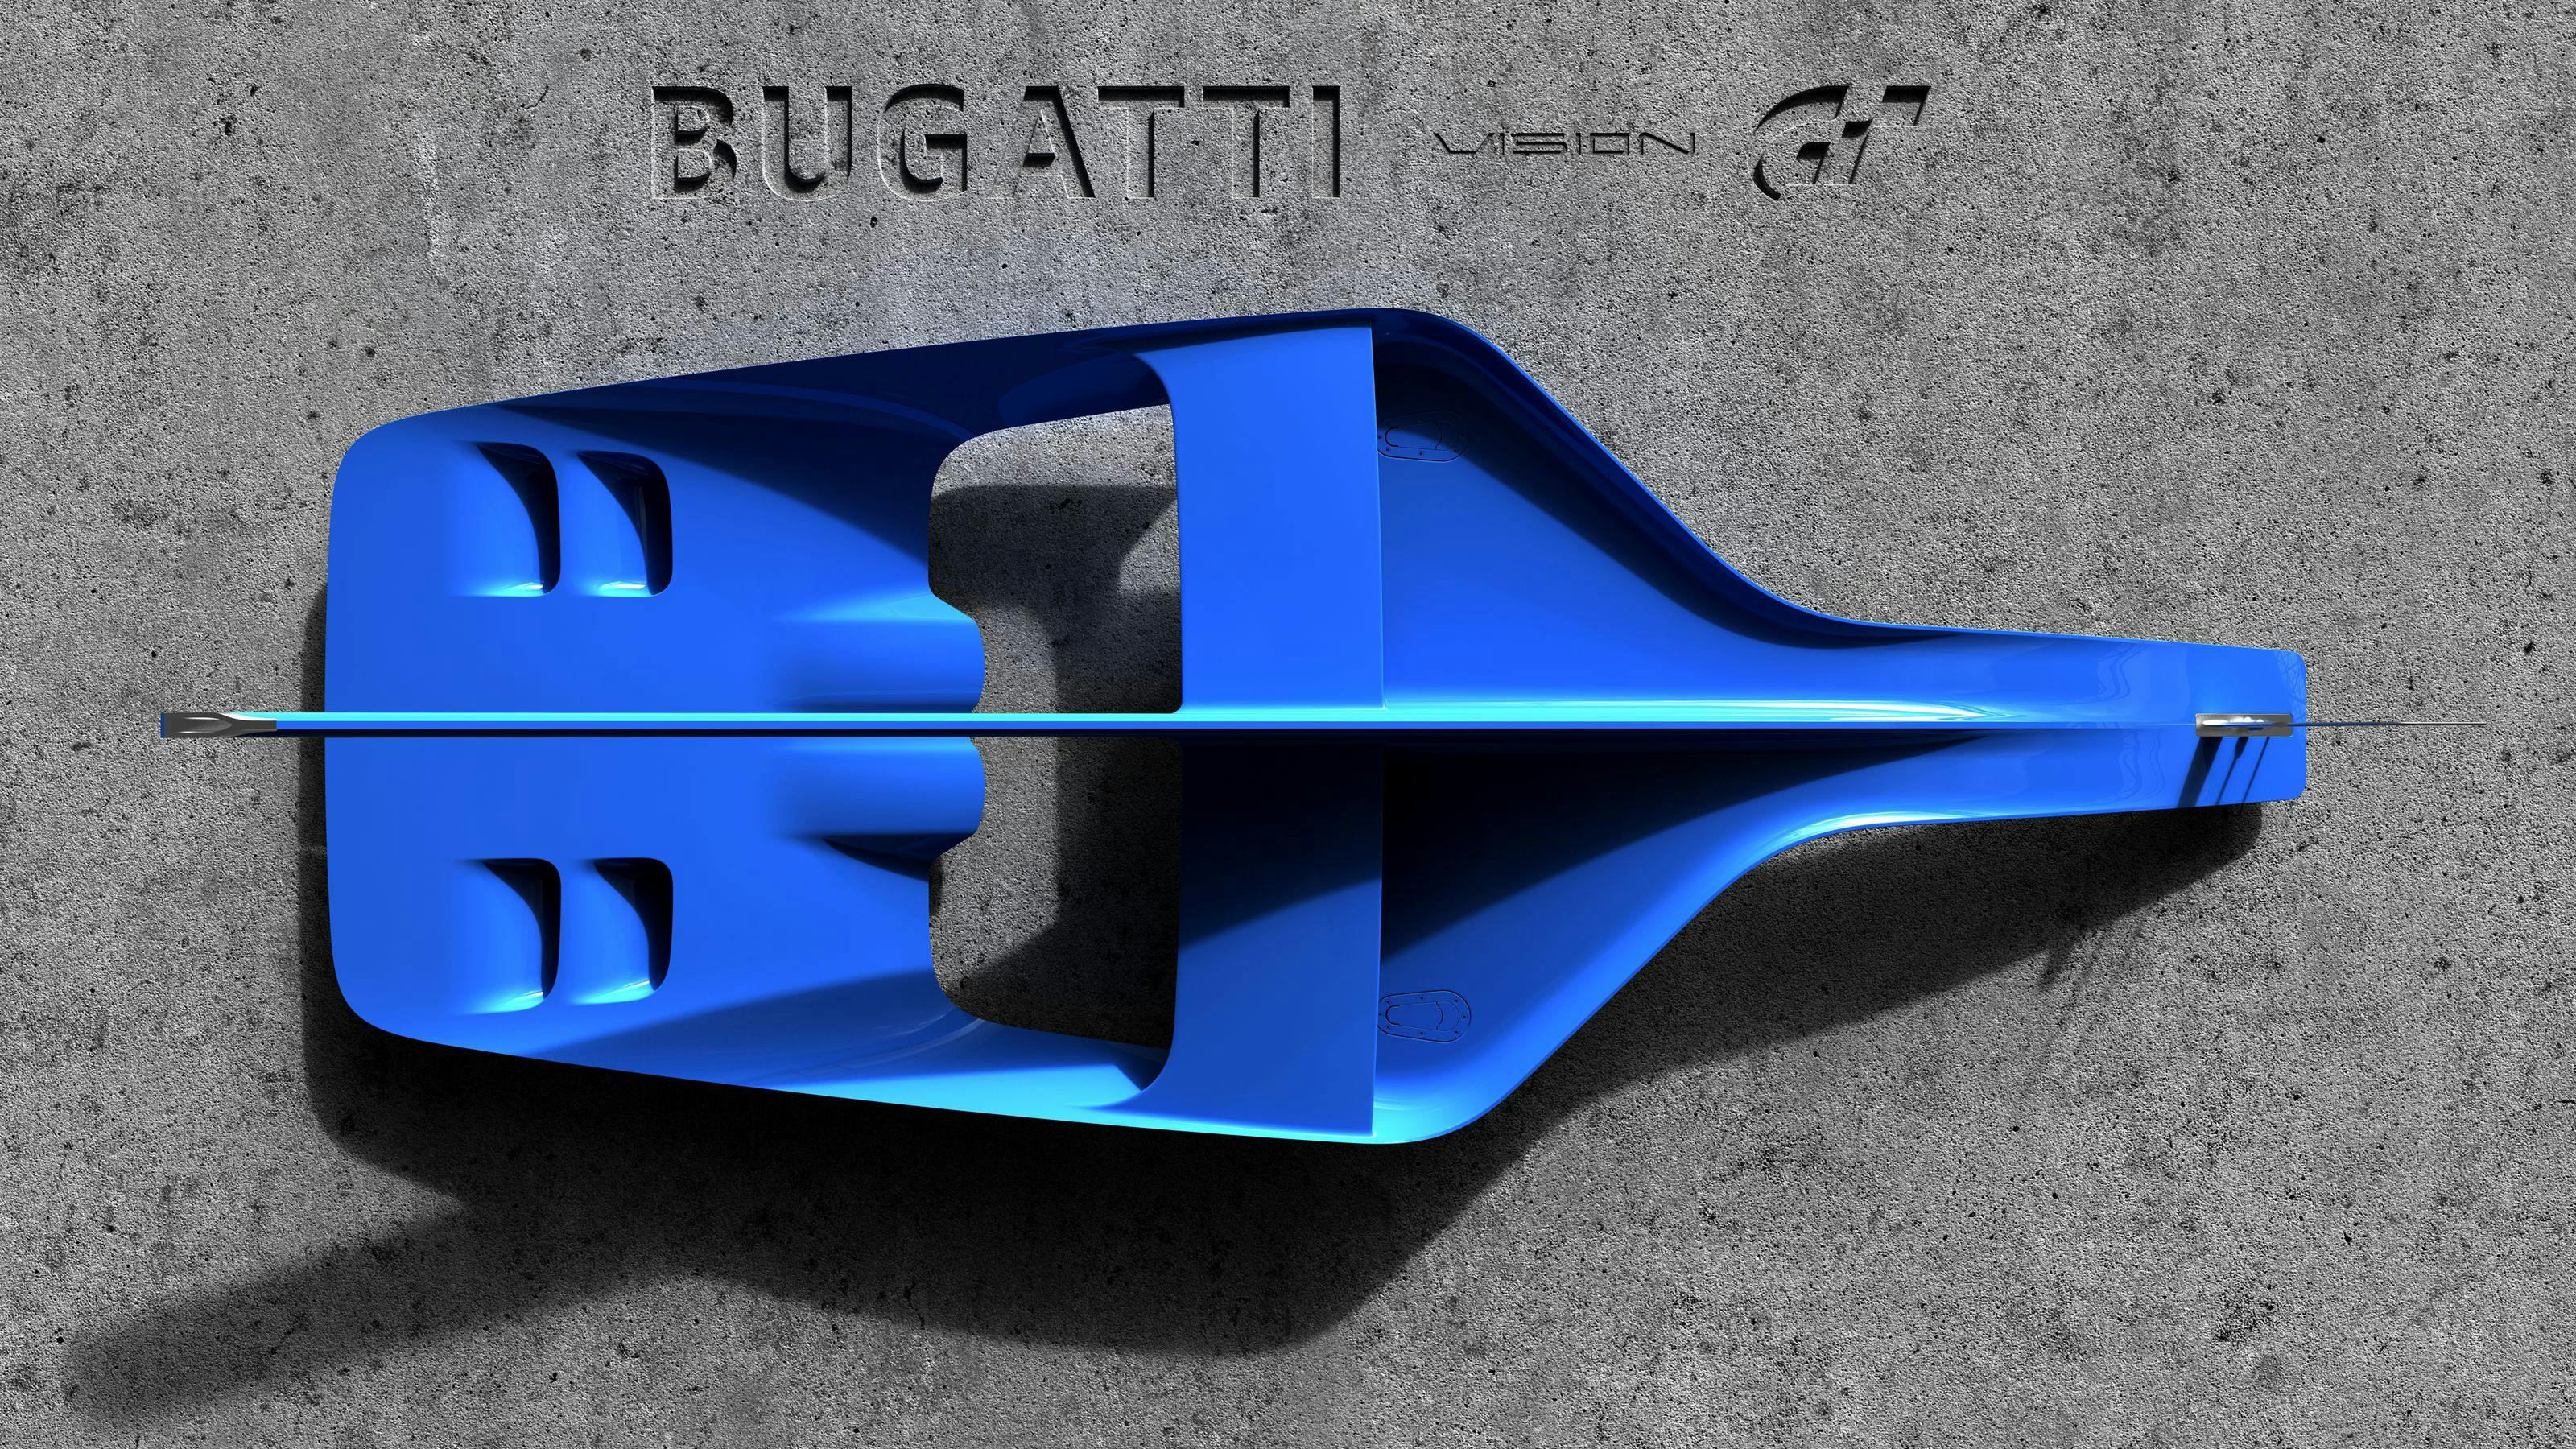 “This is for the fans” – Bugatti creates its first vehicle for “Vision Gran Turismo”